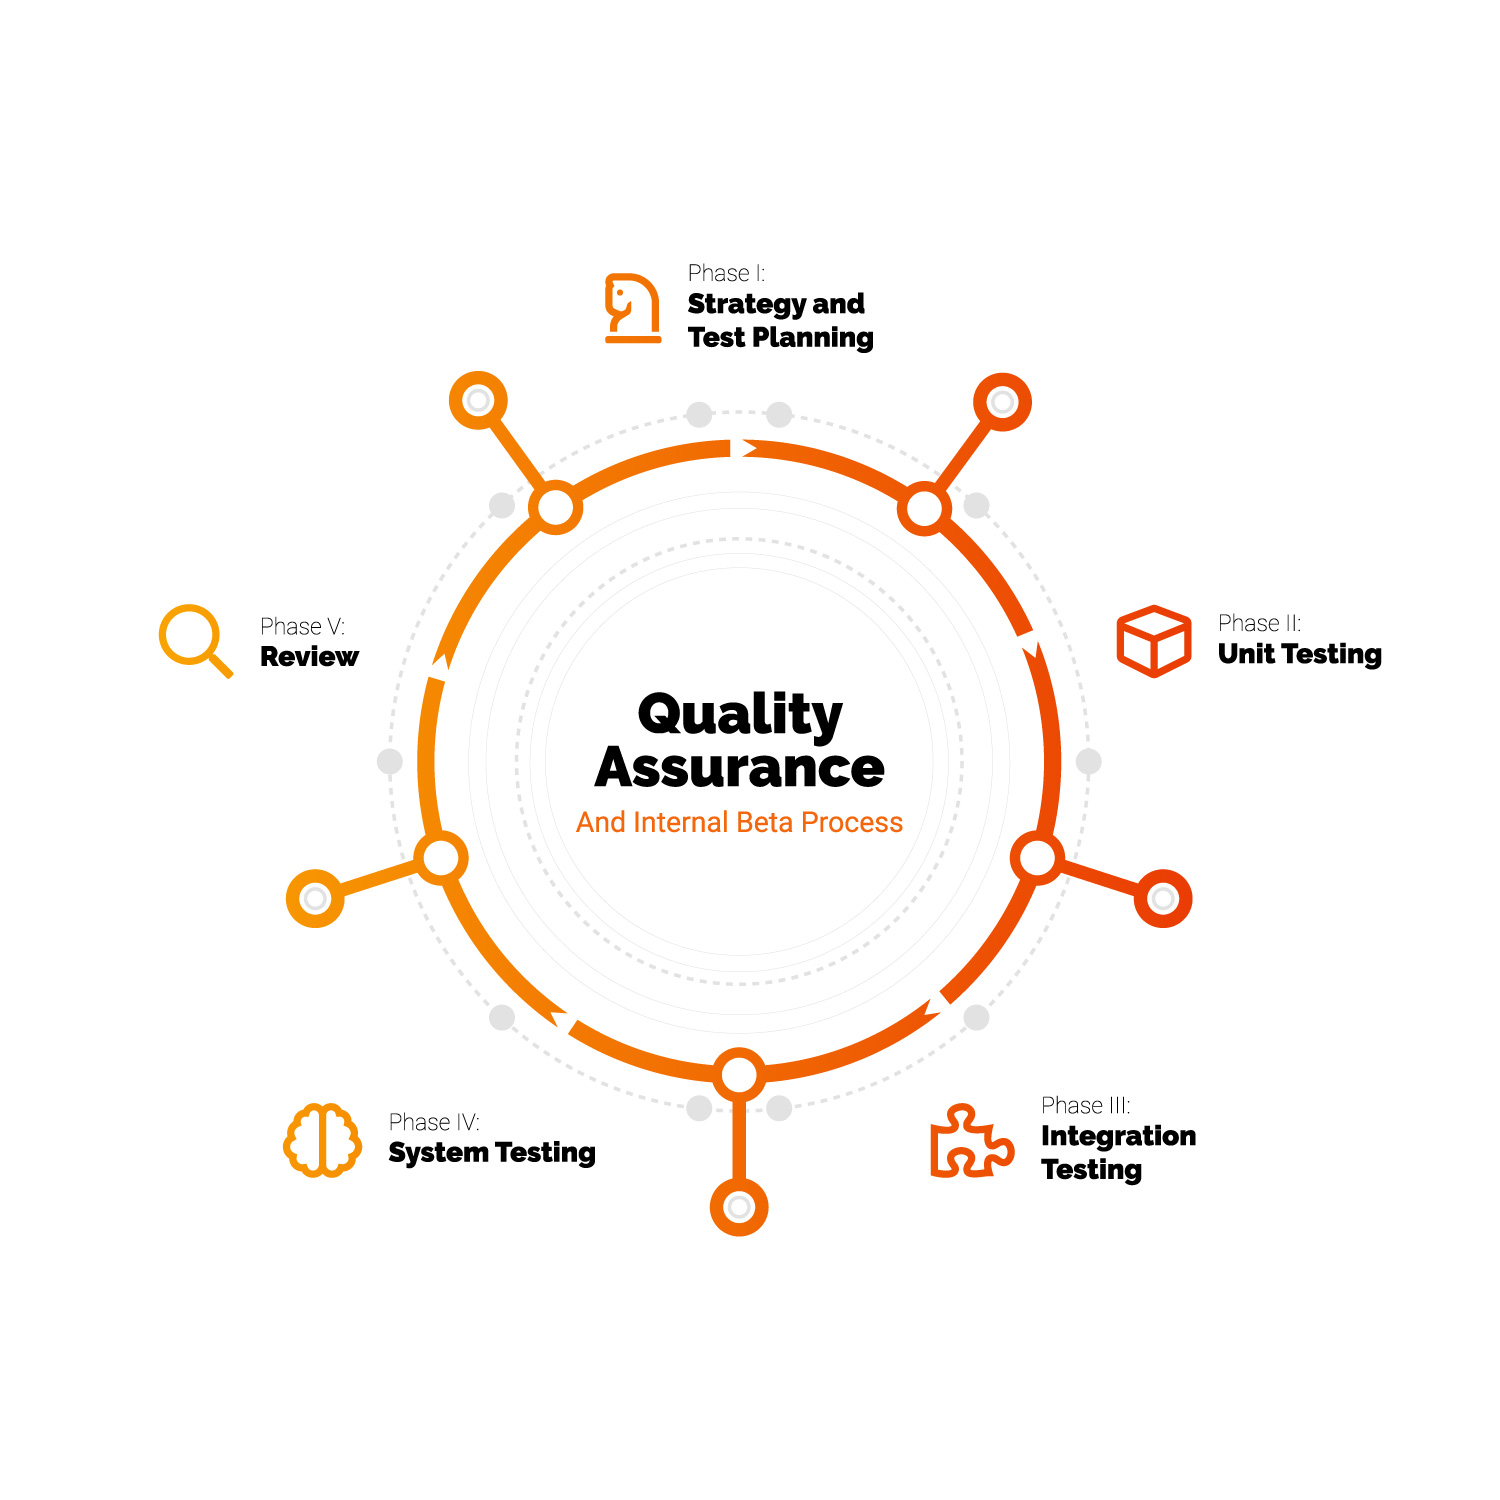 Fyresite's Quality Assurance and Internal Beta Process displayed in the form of a 5-part circular graphic